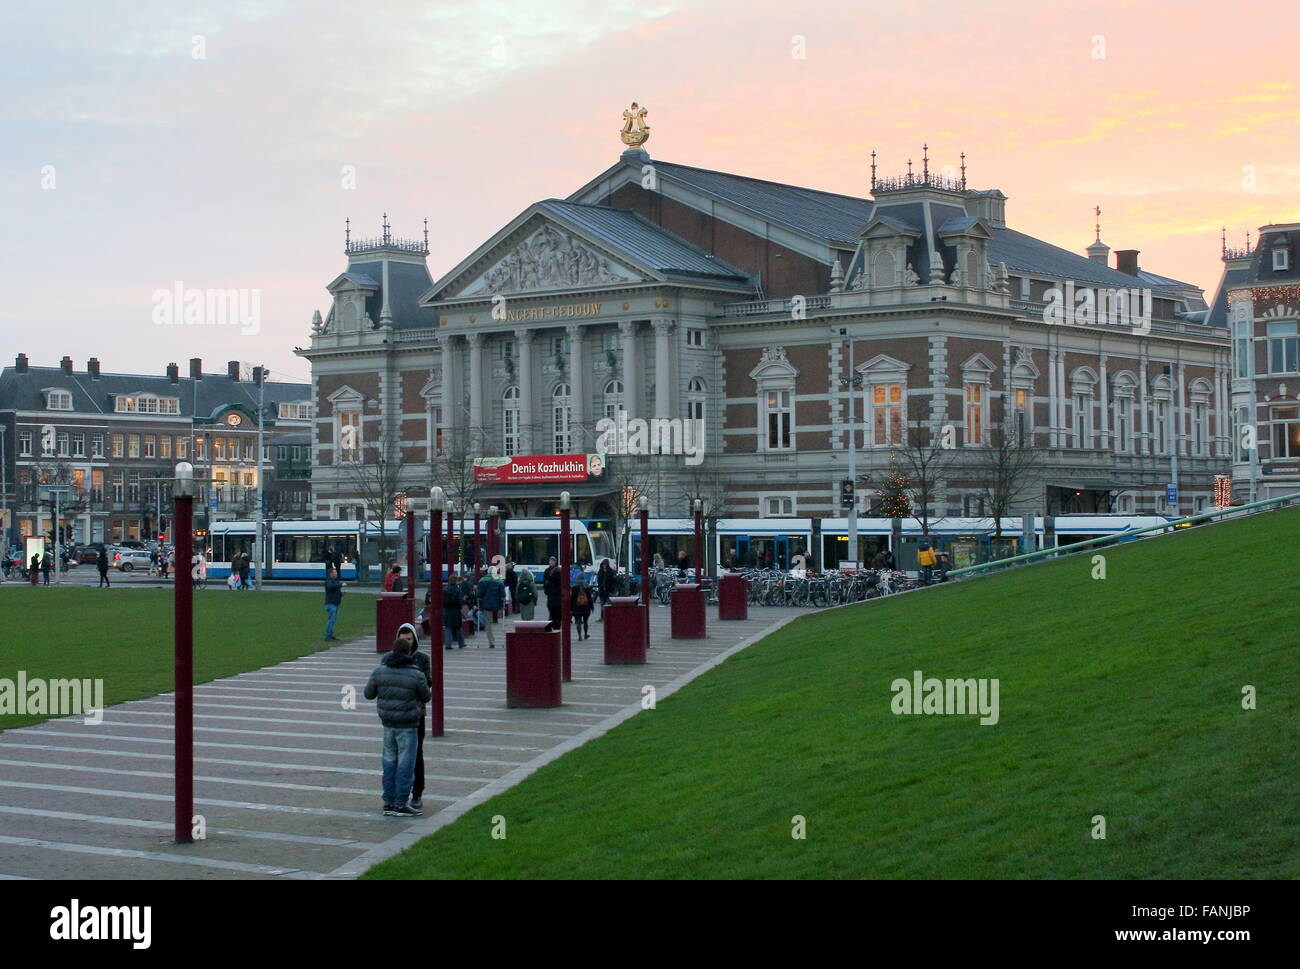 Winter Sunset behind the Koninklijk Concertgebouw (Royal Concert Hall) seen from Museumplein square,  Amsterdam, The Netherlands Stock Photo